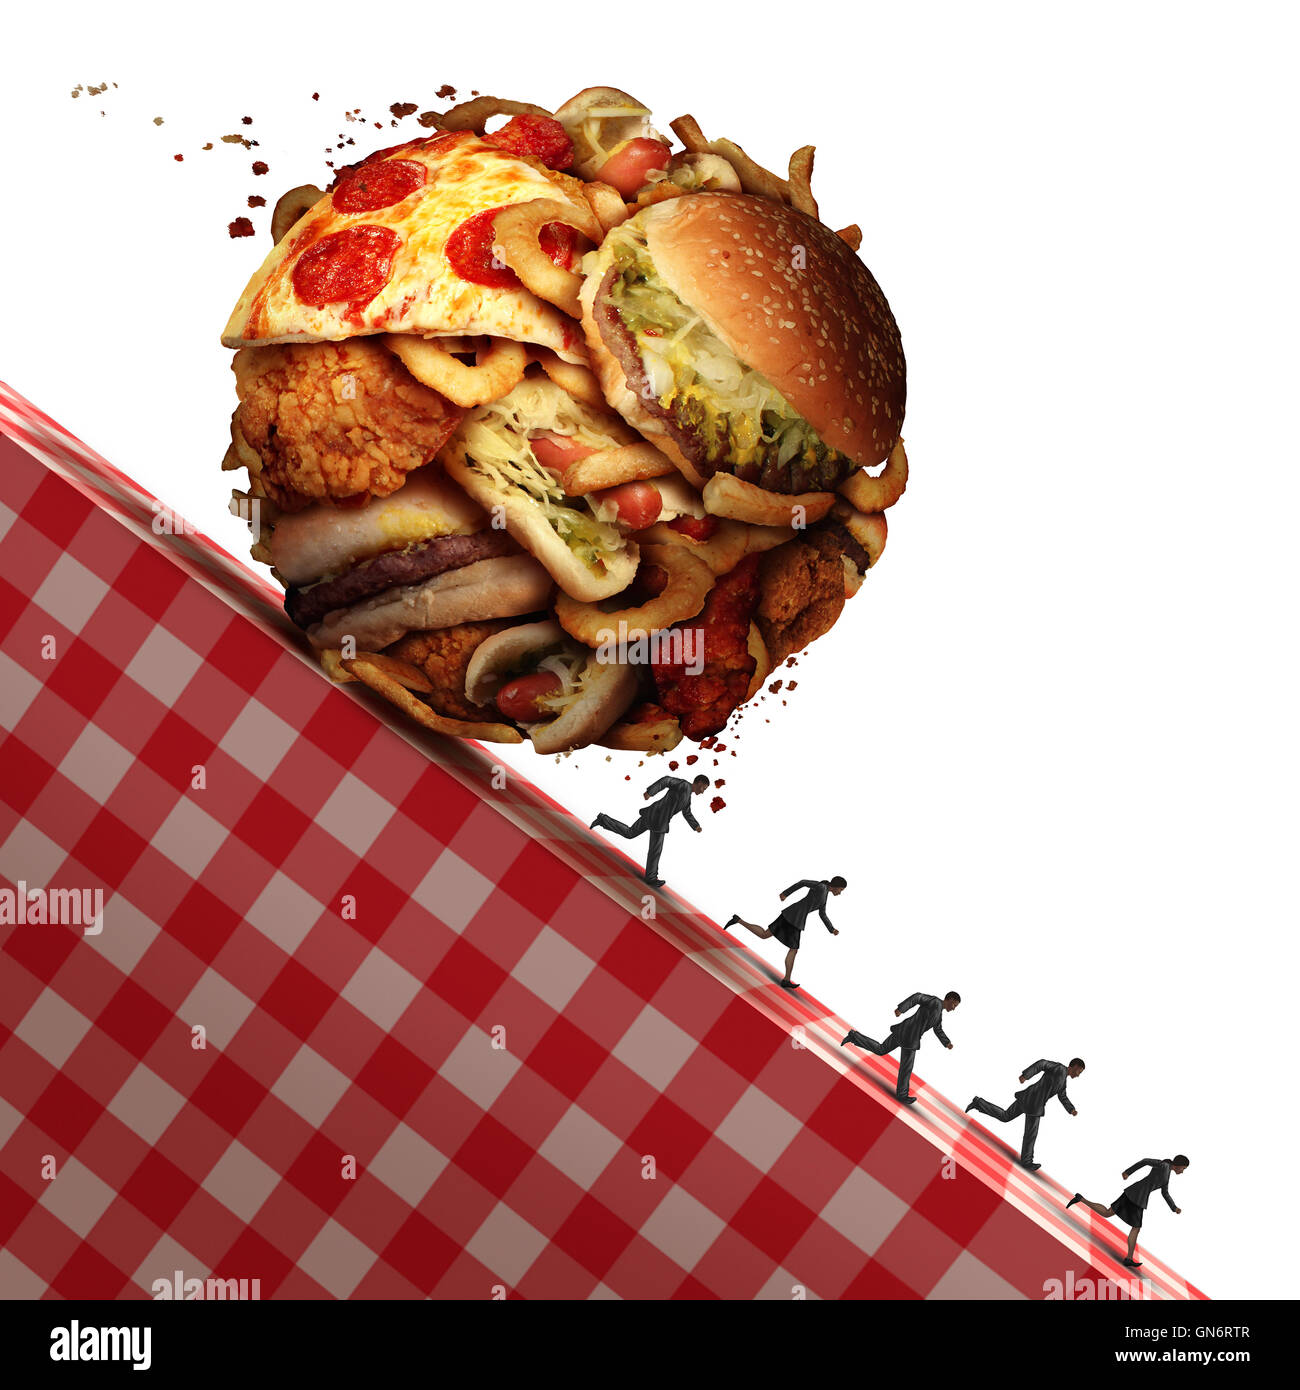 Cholesterol health danger as Junk food eating and dealing with a nutrition medical urgency concept as people running away to avoid an unhealthy diet with a ball made of greasy snacks as hamburgers and french fries with 3D illustration elements. Stock Photo